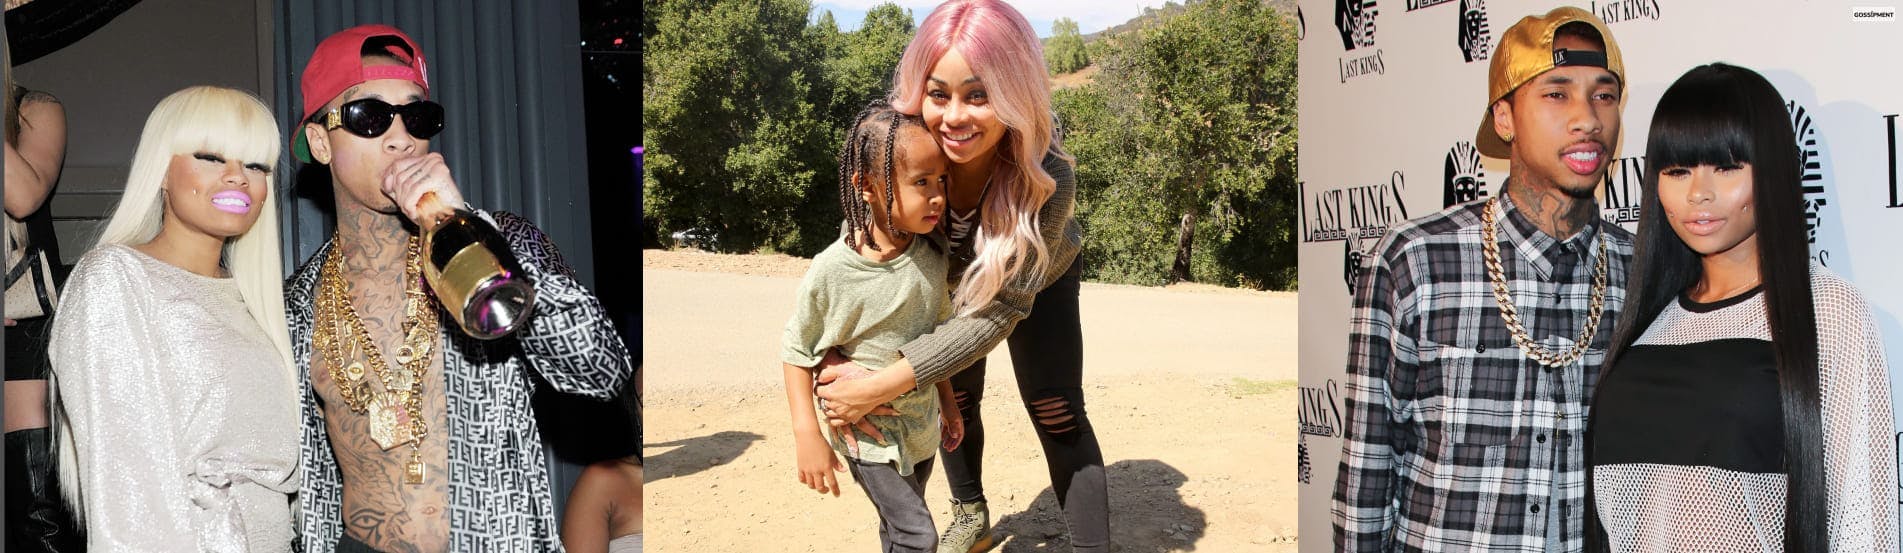 Cover Image for Blac Chyna Is Hawking Items To “Make Ends Meet” Amid Custody Battle